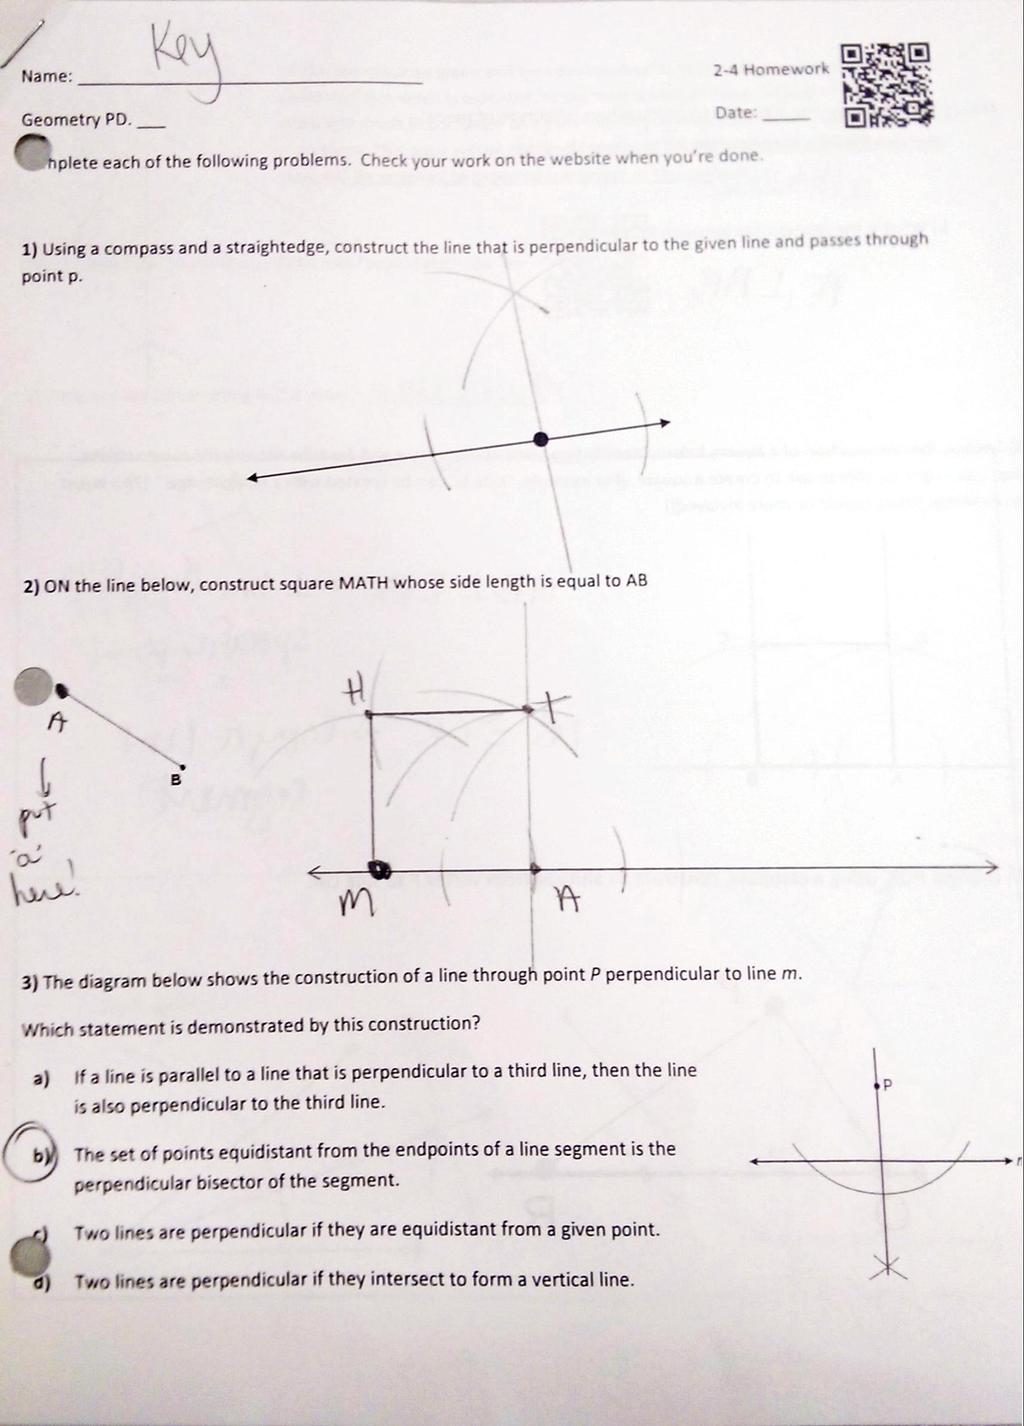 Name: Geometry PD. 2-4 Homework Date. plete each of the following problems.